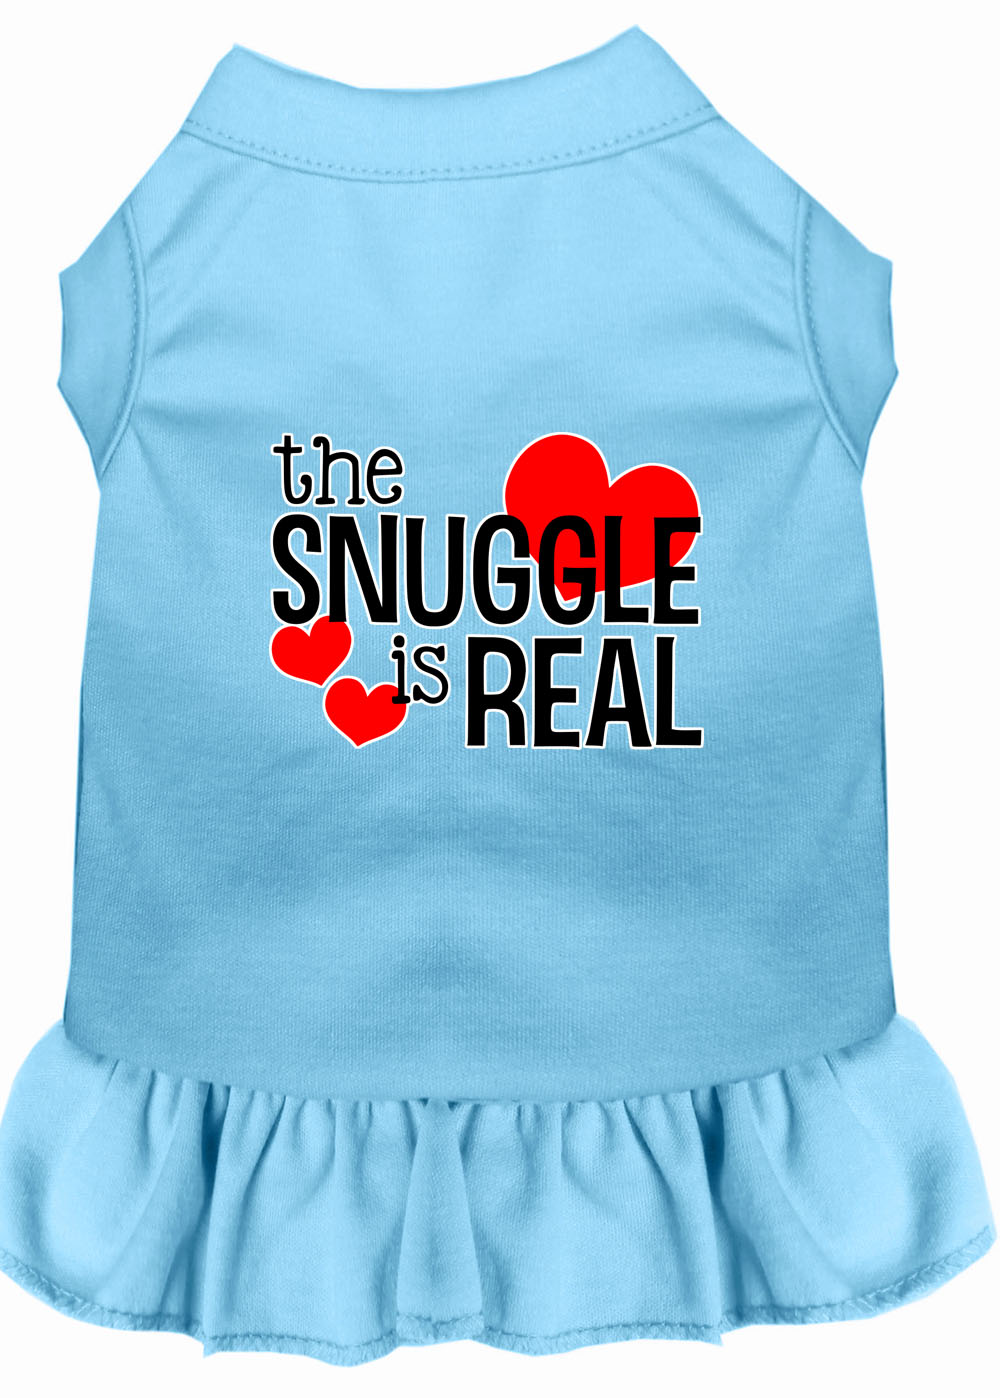 The Snuggle is Real Screen Print Dog Dress Baby Blue XS